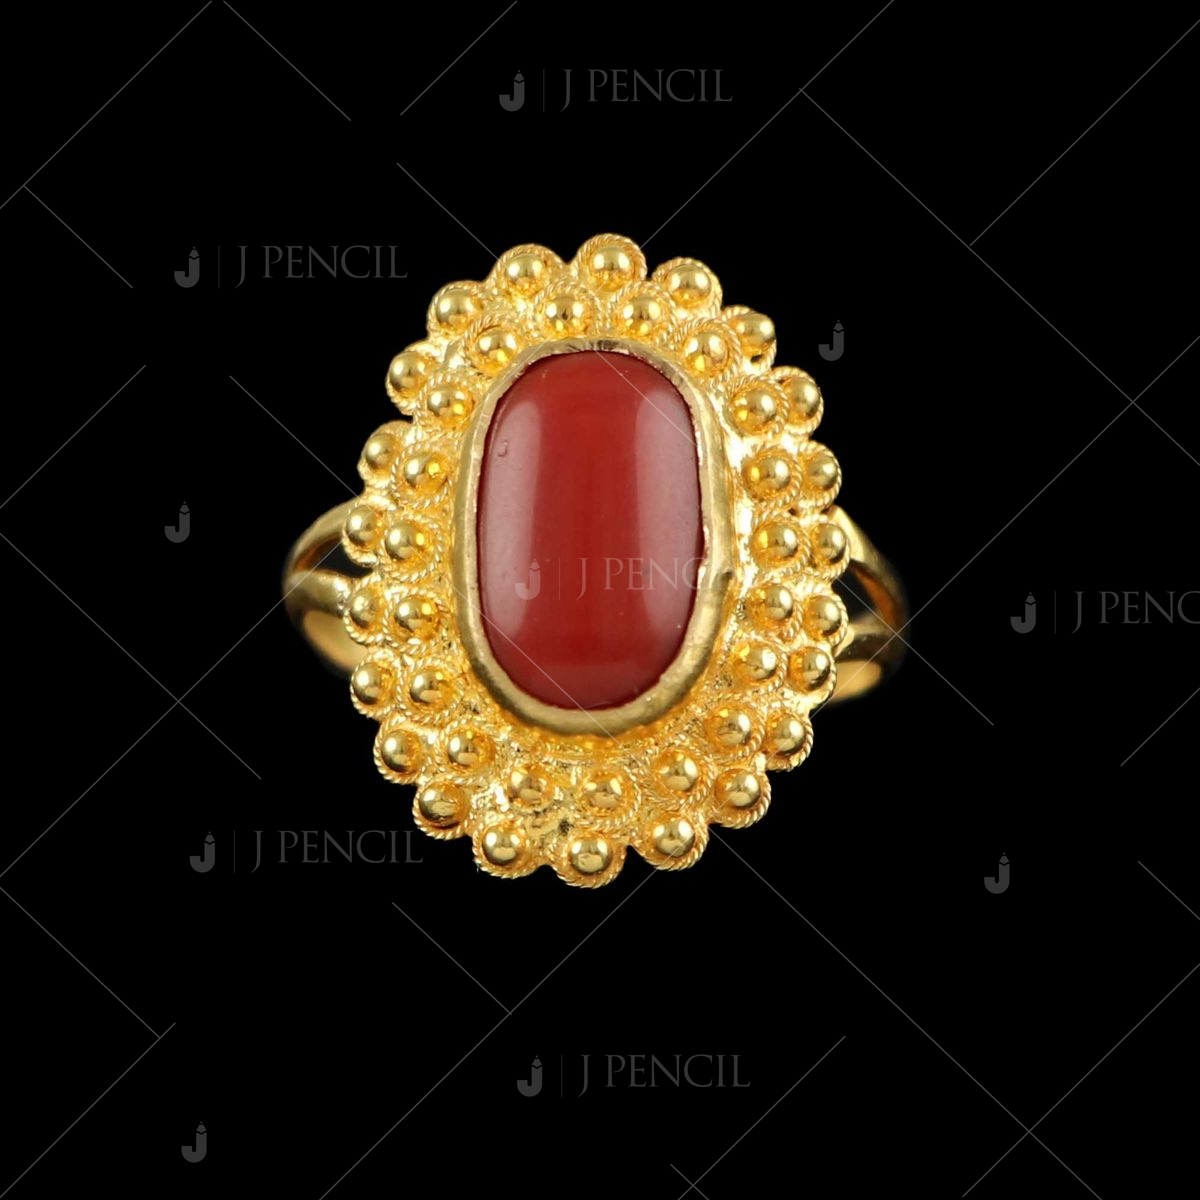 Coral Ring Heart Shaped in Gold - Eredi Jovon Venice